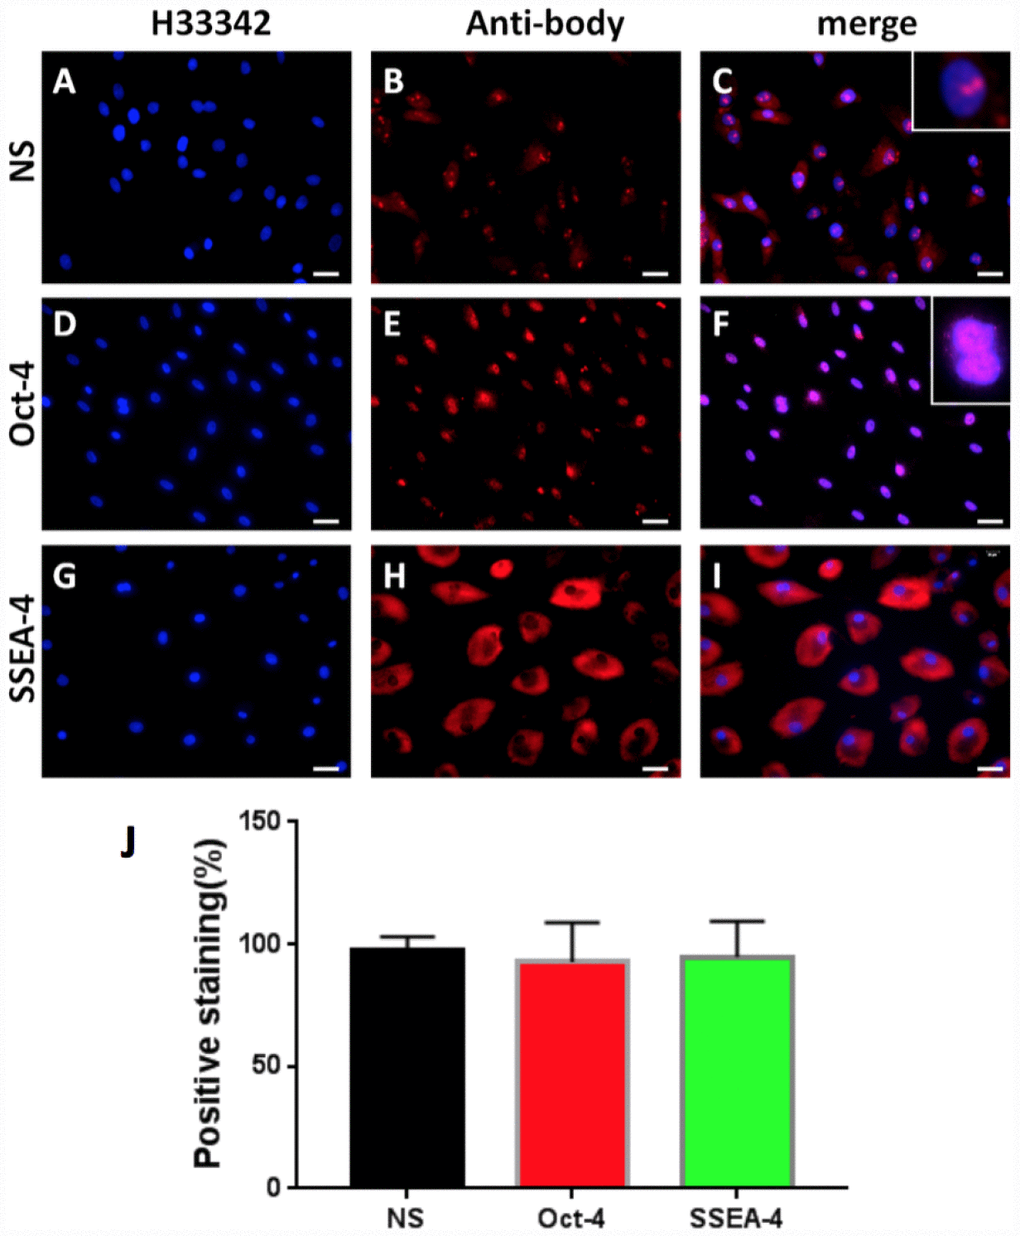 Stem cell marker expression of rabbit AF cells tested by immunostaining. (A–C) nucleostemin testing; (D–F) Oct-4 testing; (G–I) SSEA-4 testing. (A, D, G) the cells were stained with H33342; (B, E, L) the cells were stained with specific antibodies; (C, F, I) the merged images of the images of A, D, G and the images of B, E, L. The insets showed enlarged views of expressed nucleostemin (C) and Oct-4 (F). (J) Semi-quantification of the expression of three stem markers by immunostaining. The results indicated that more than 92% of the cells isolated from rabbit AF tissues were stem cells. Bars = 100 μm.